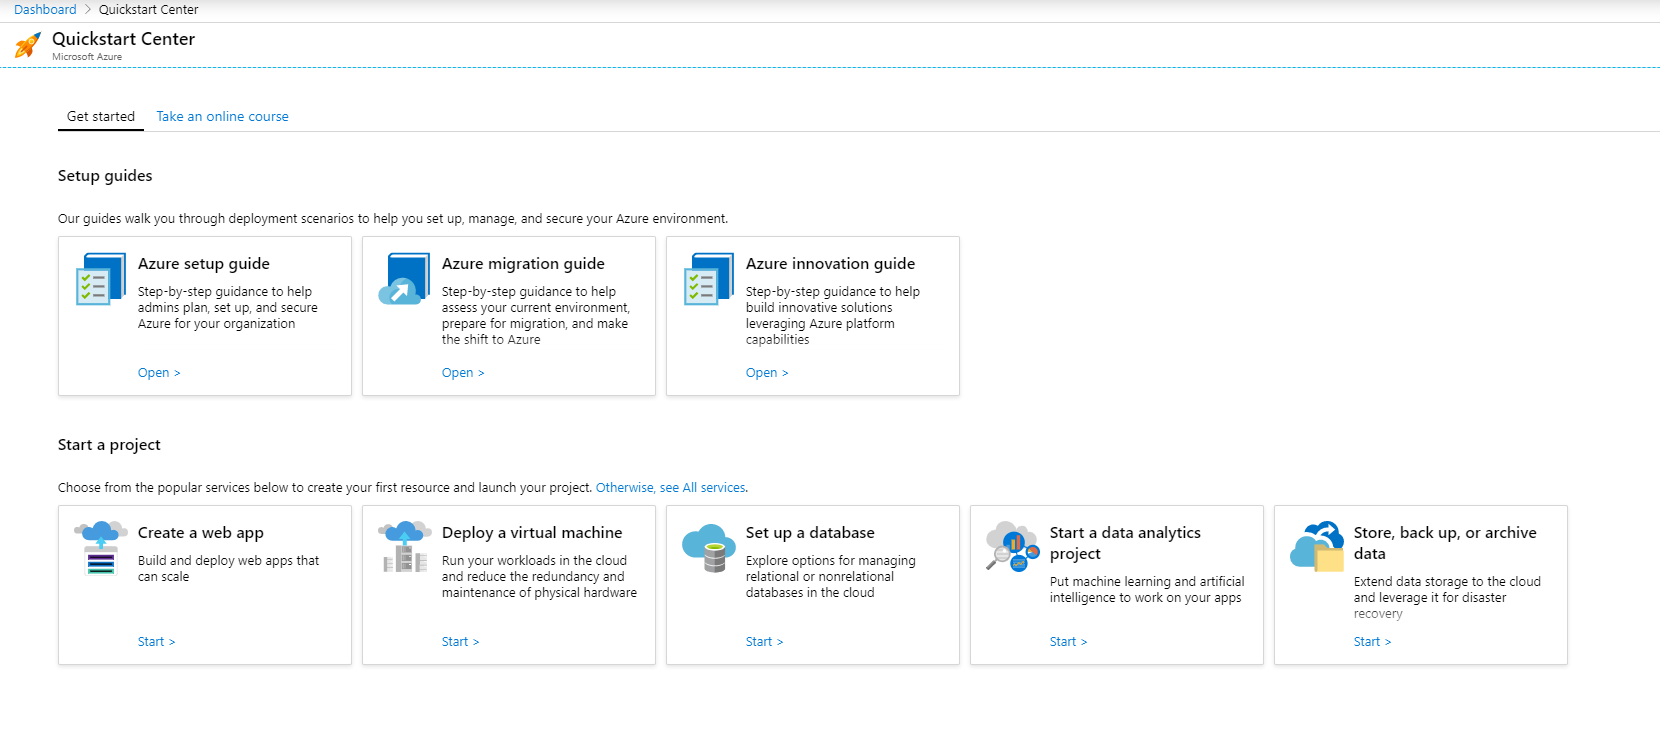 Tip 270 - Getting Started with the Azure Quickstart Center